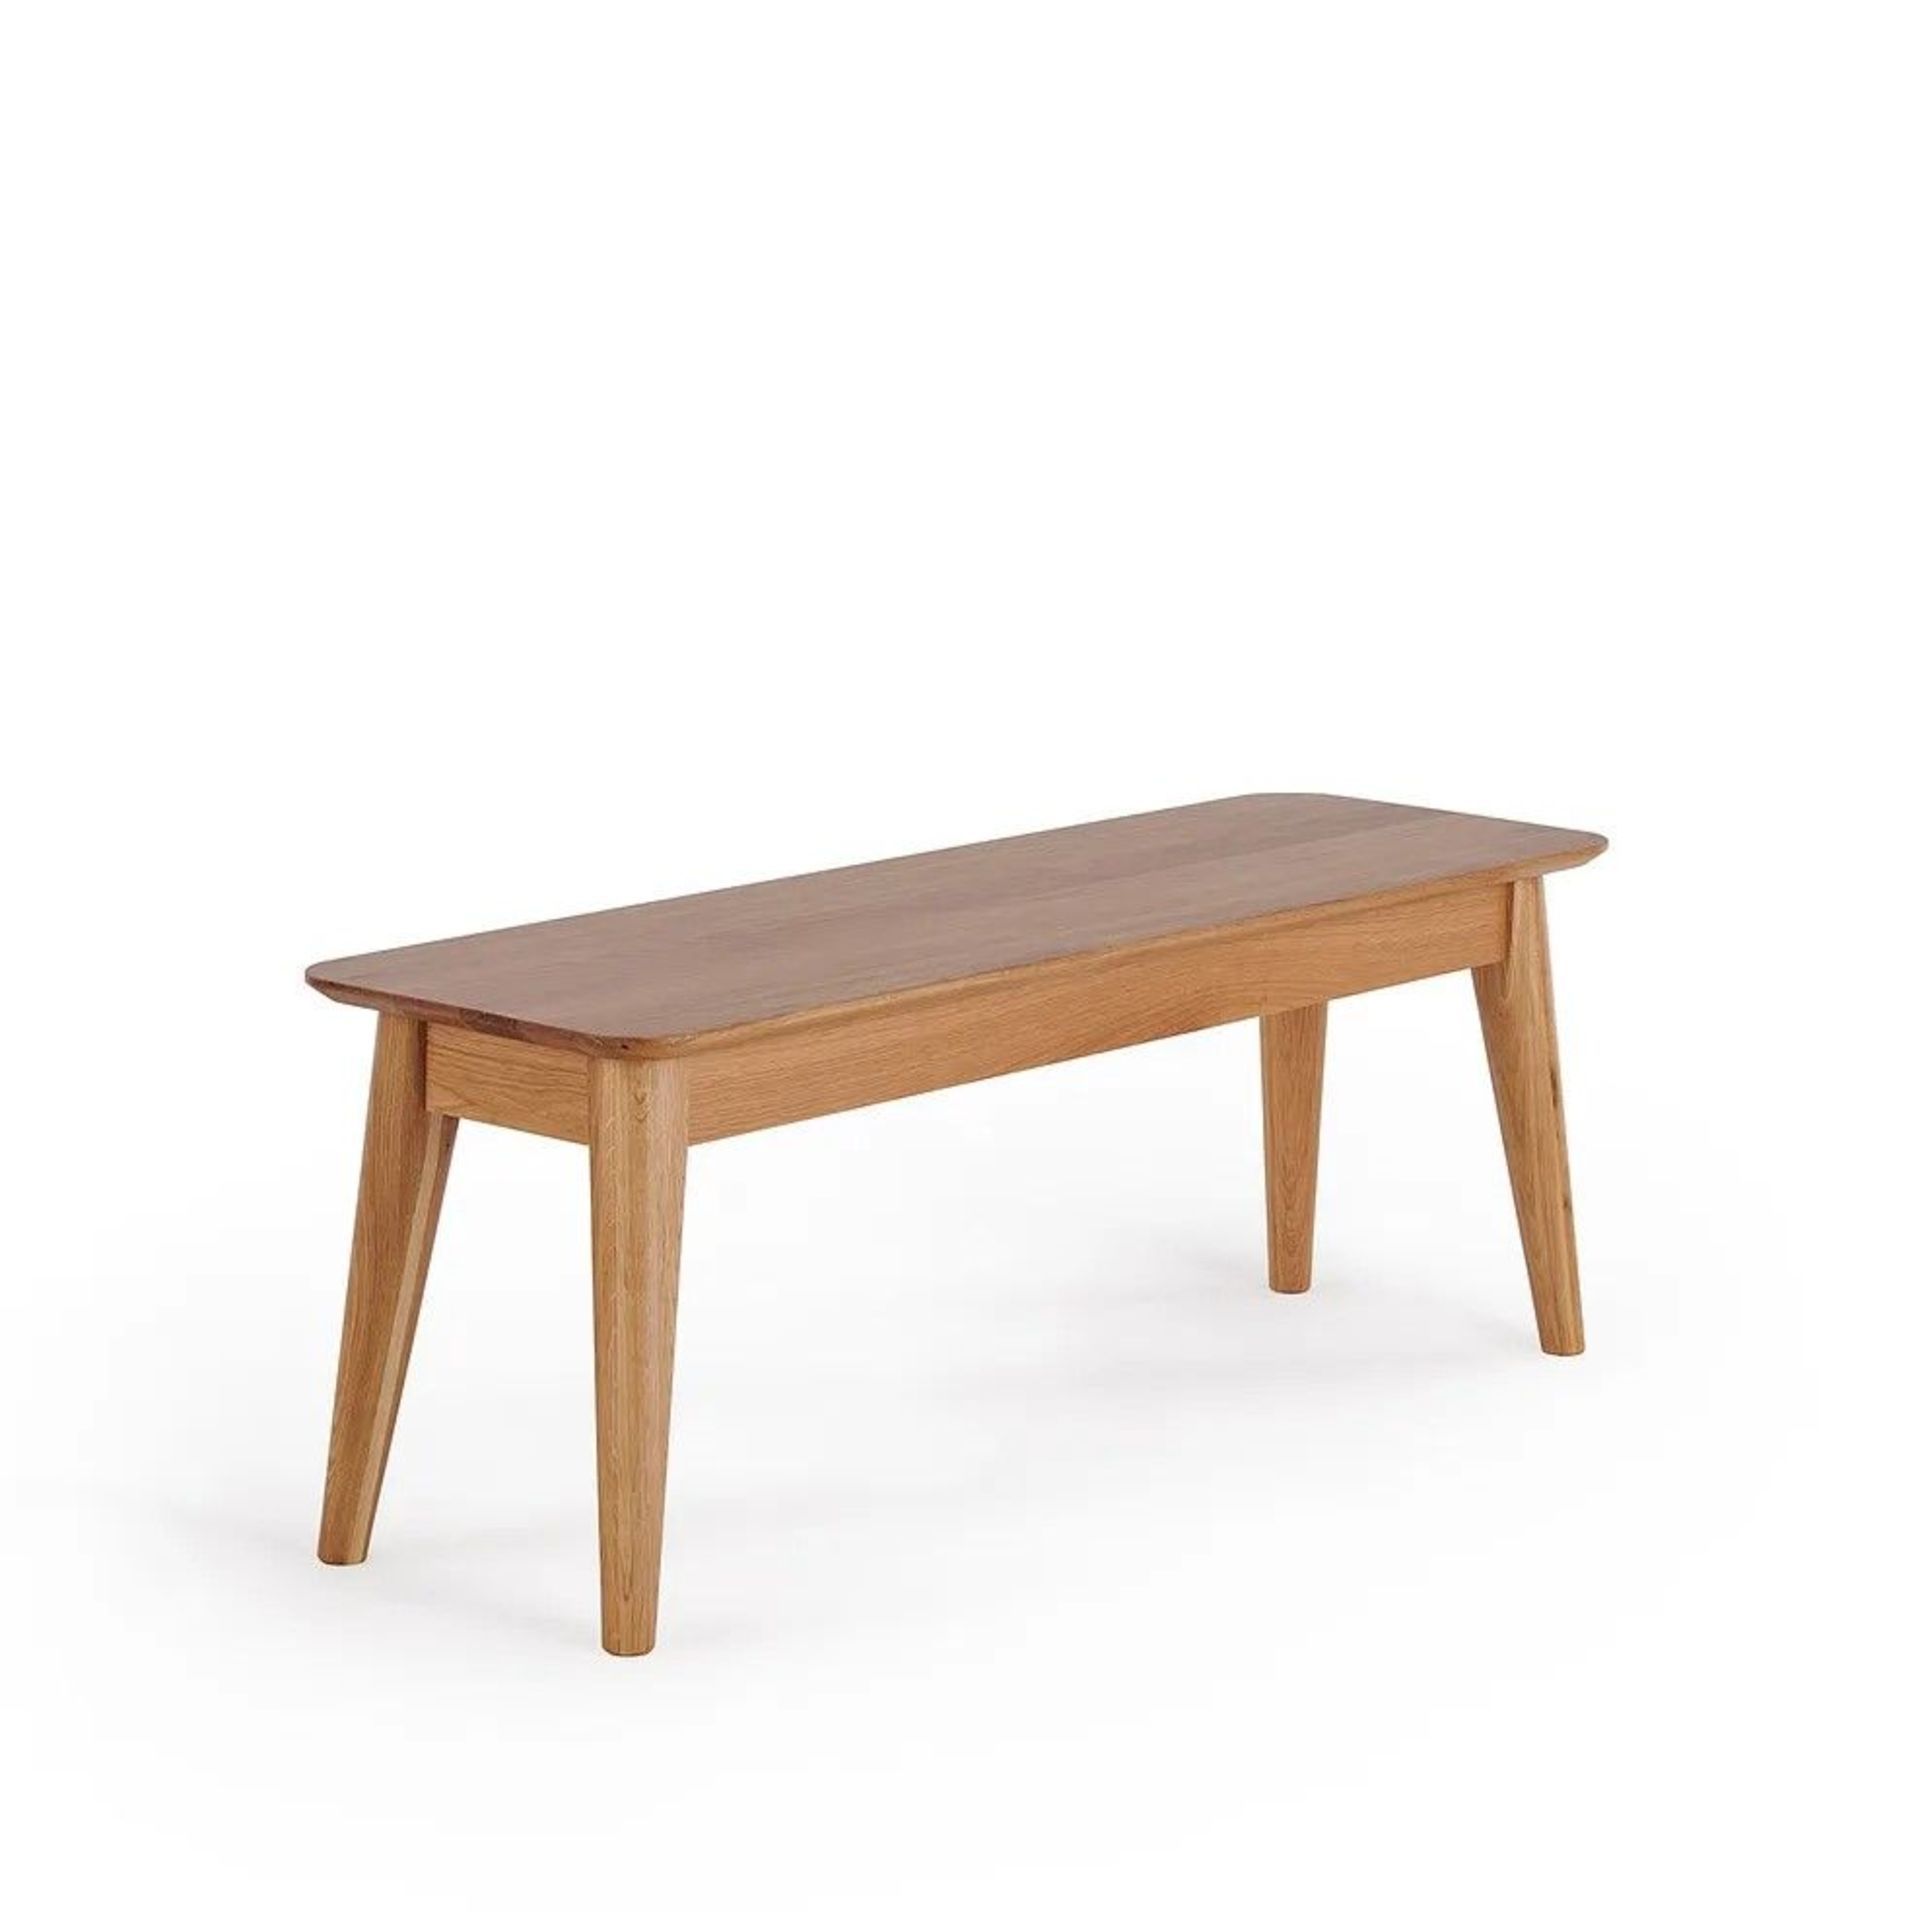 2 X New Boxed - Oscar Natural Solid Oak Bench. 120cm Long. RRP £290 EACH, TOTAL RRP £580. For a more